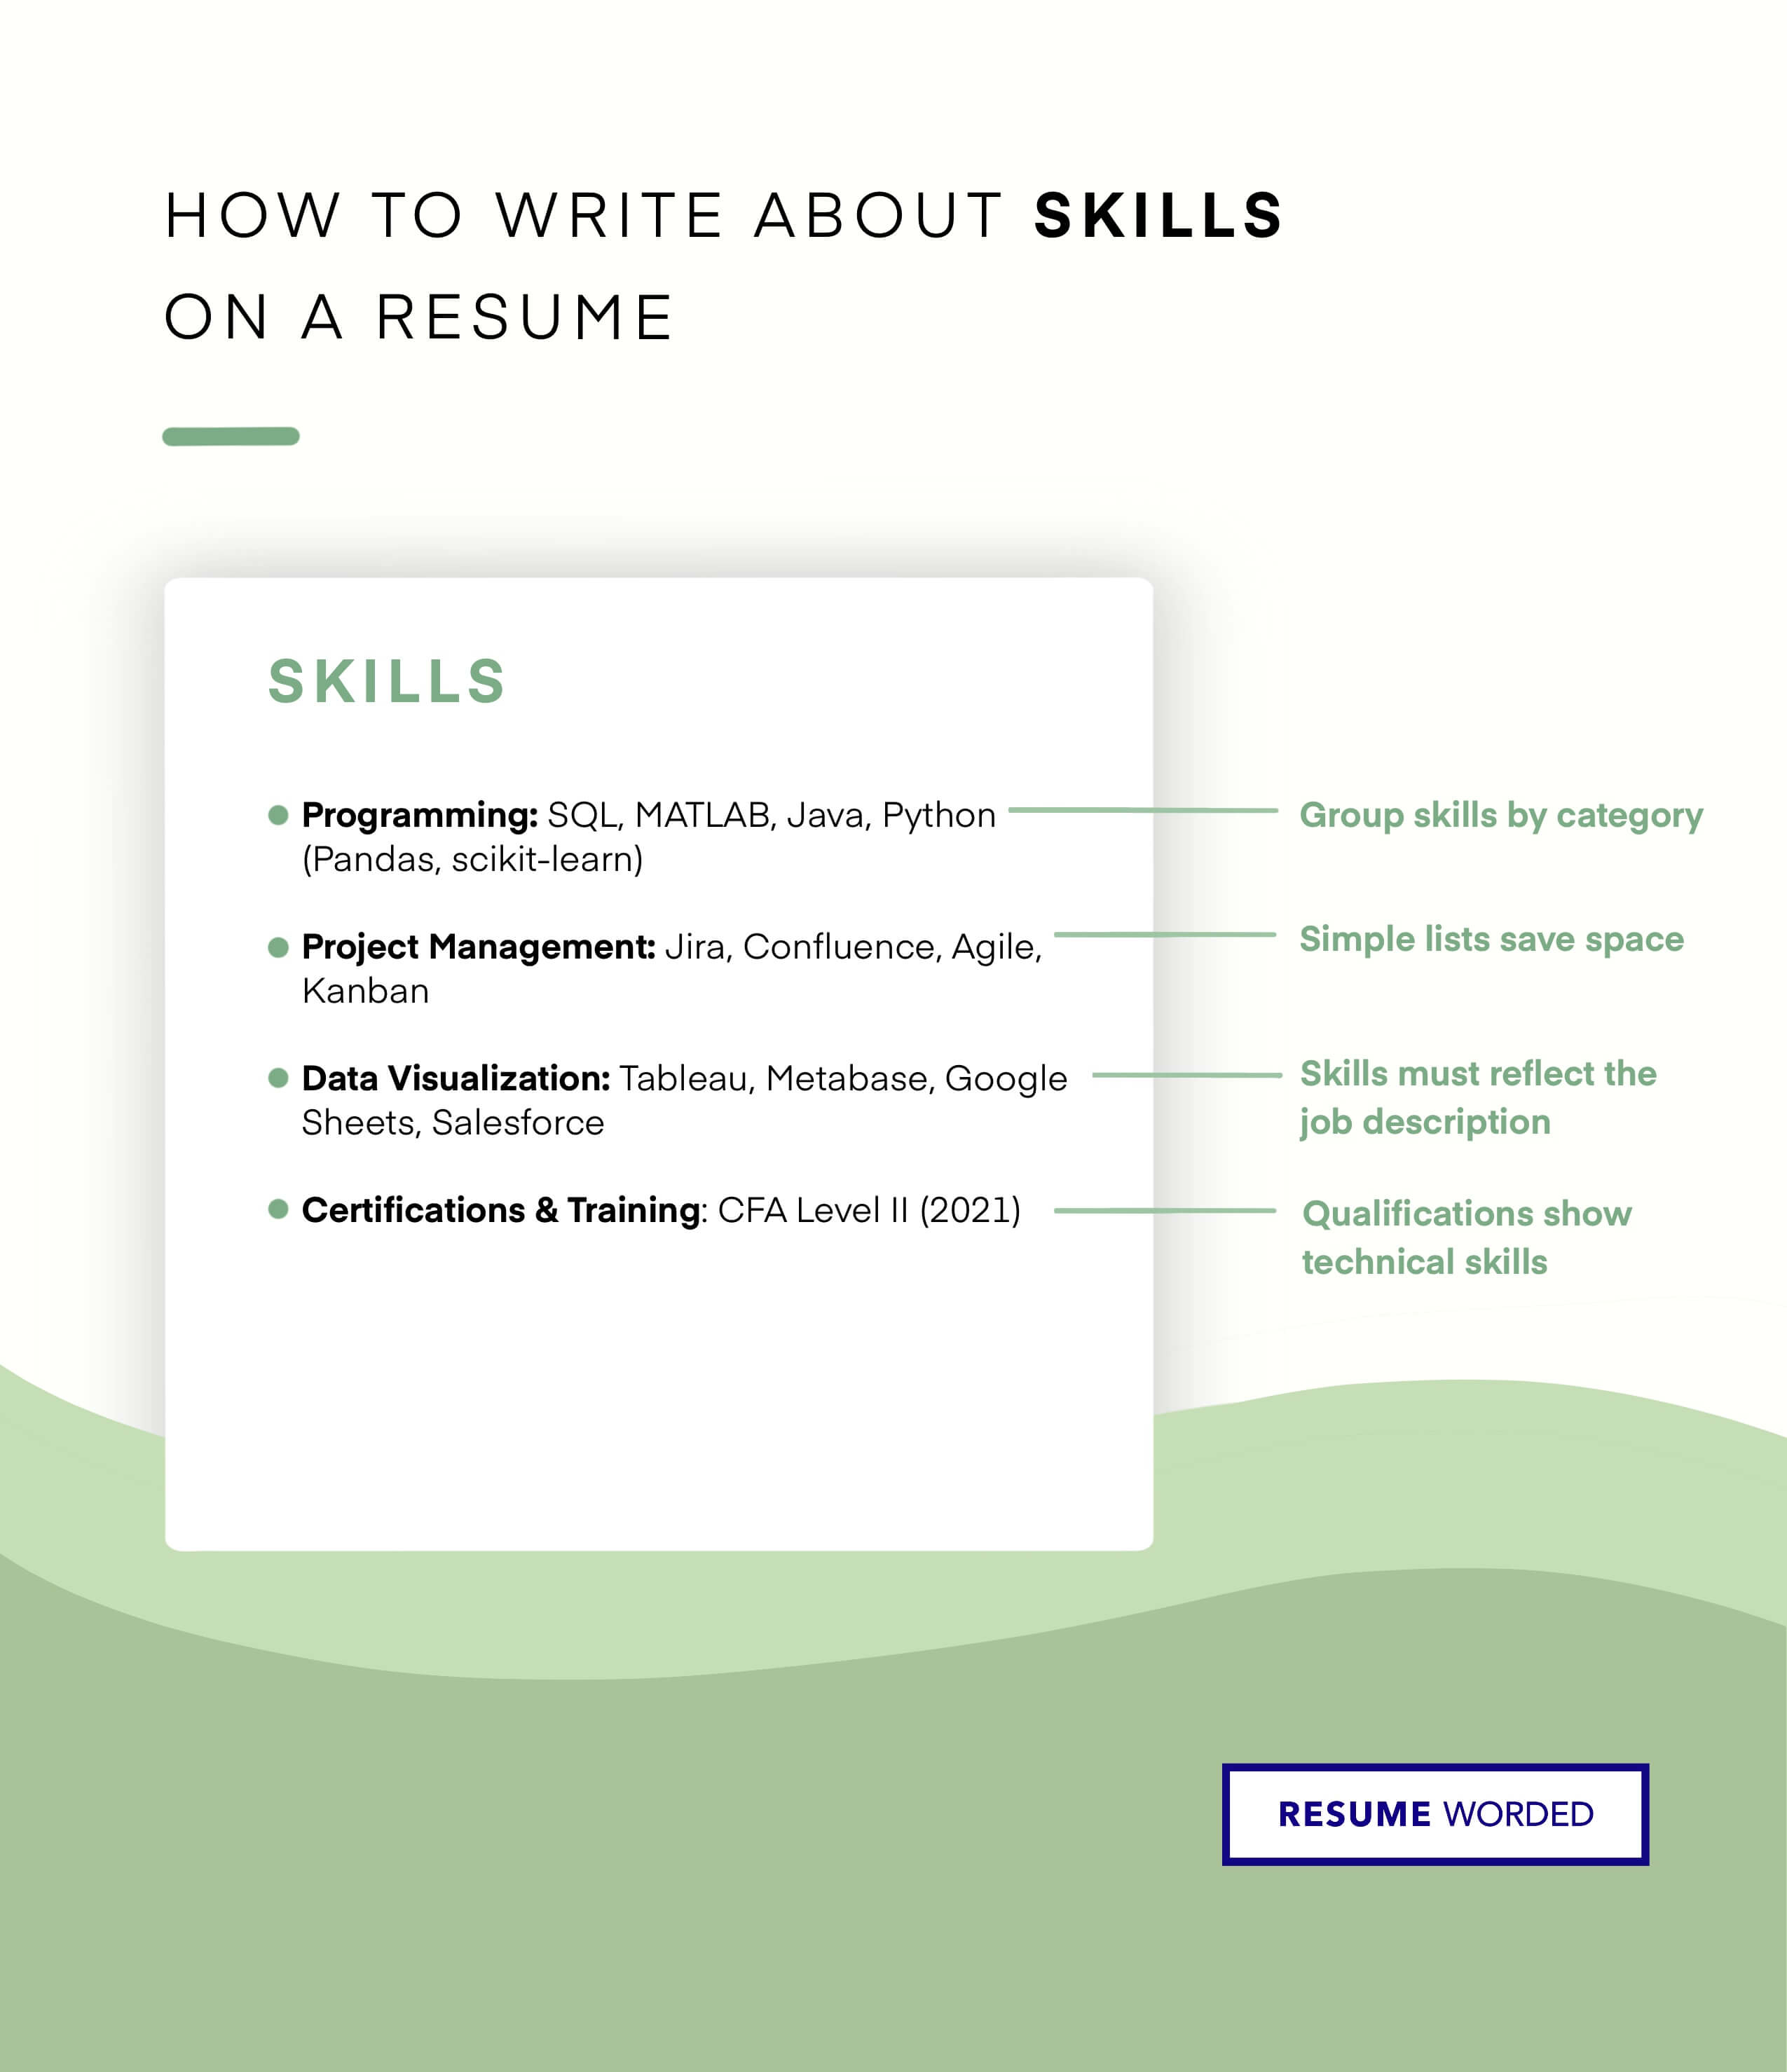 List network engineering technical skills listed in skills section, to get past ATS - Network Engineer Resume